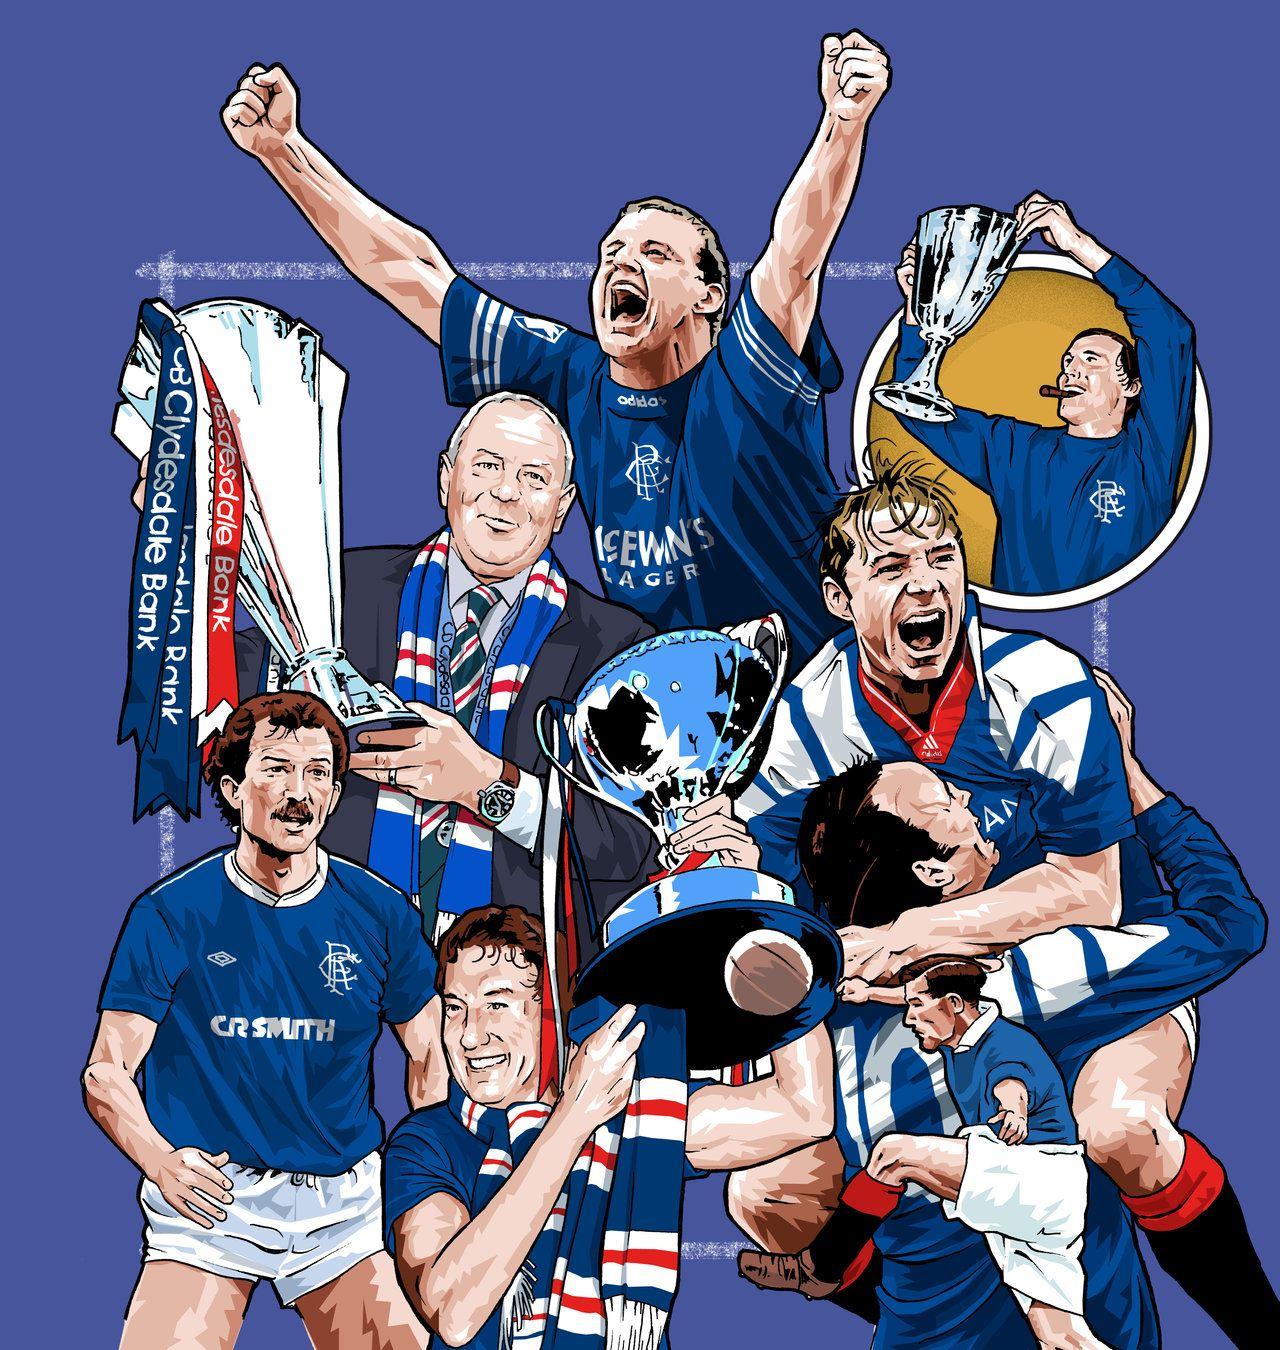 Glasgow Rangers book cover